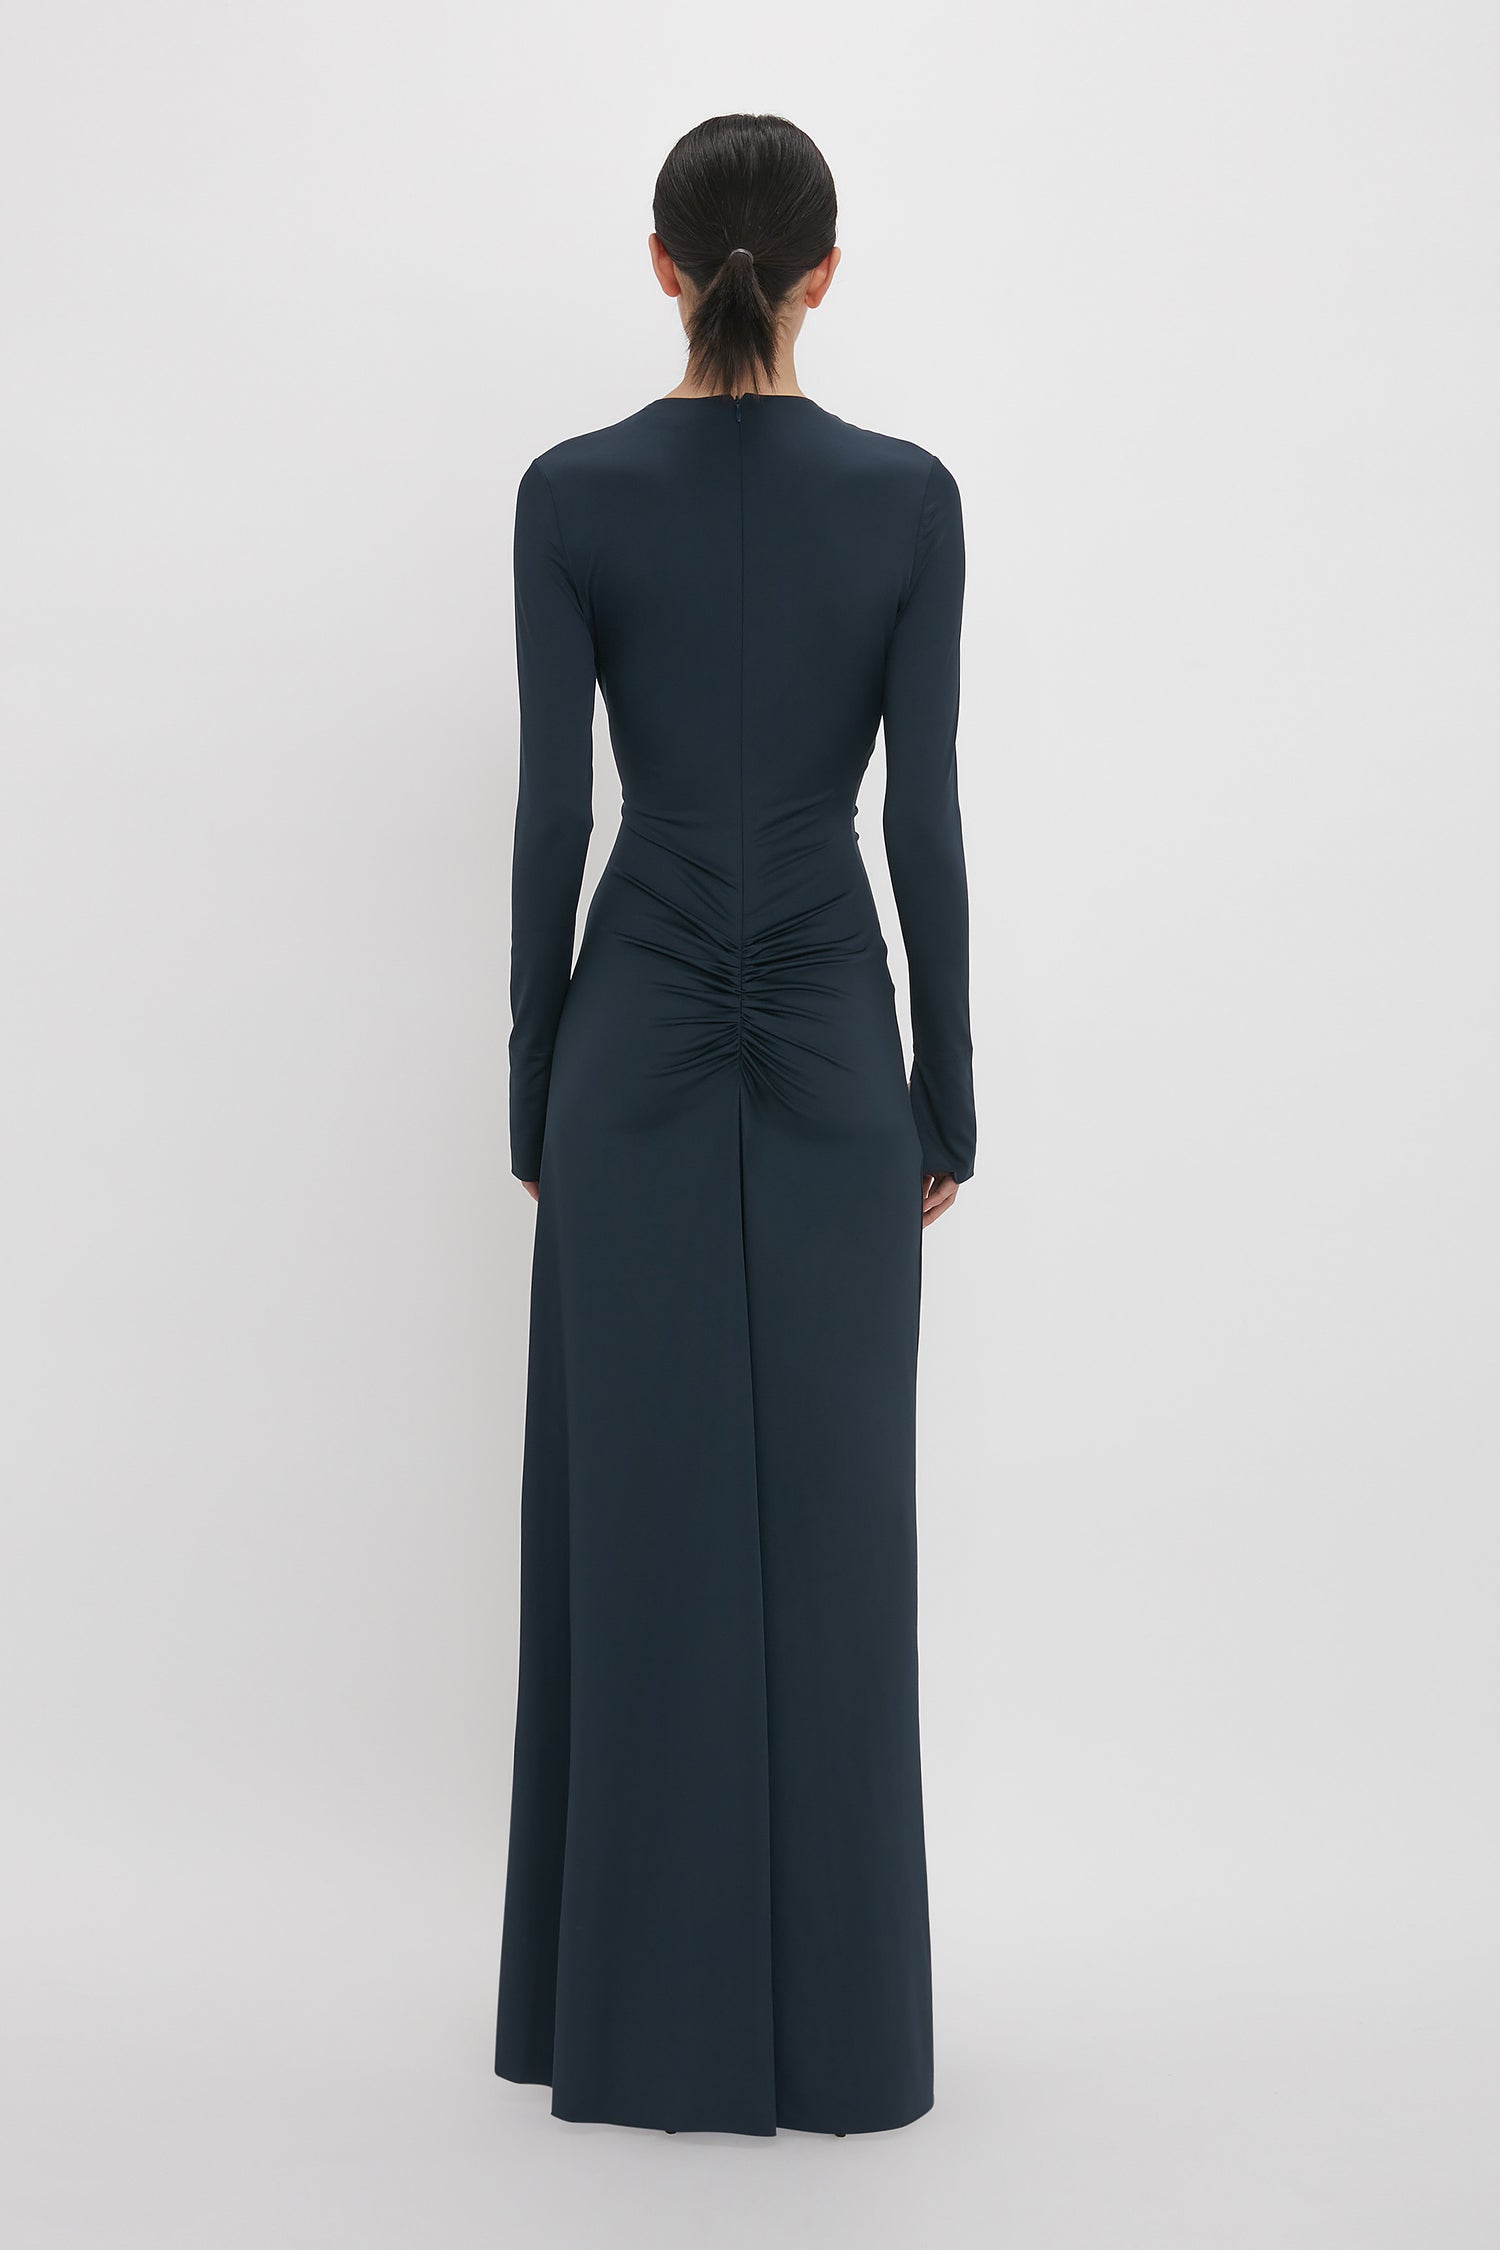 A person with dark hair tied in a low ponytail is wearing a long-sleeved, floor-length Ruched Detail Floor-Length Gown In Midnight by Victoria Beckham seen from the back against a plain white background.